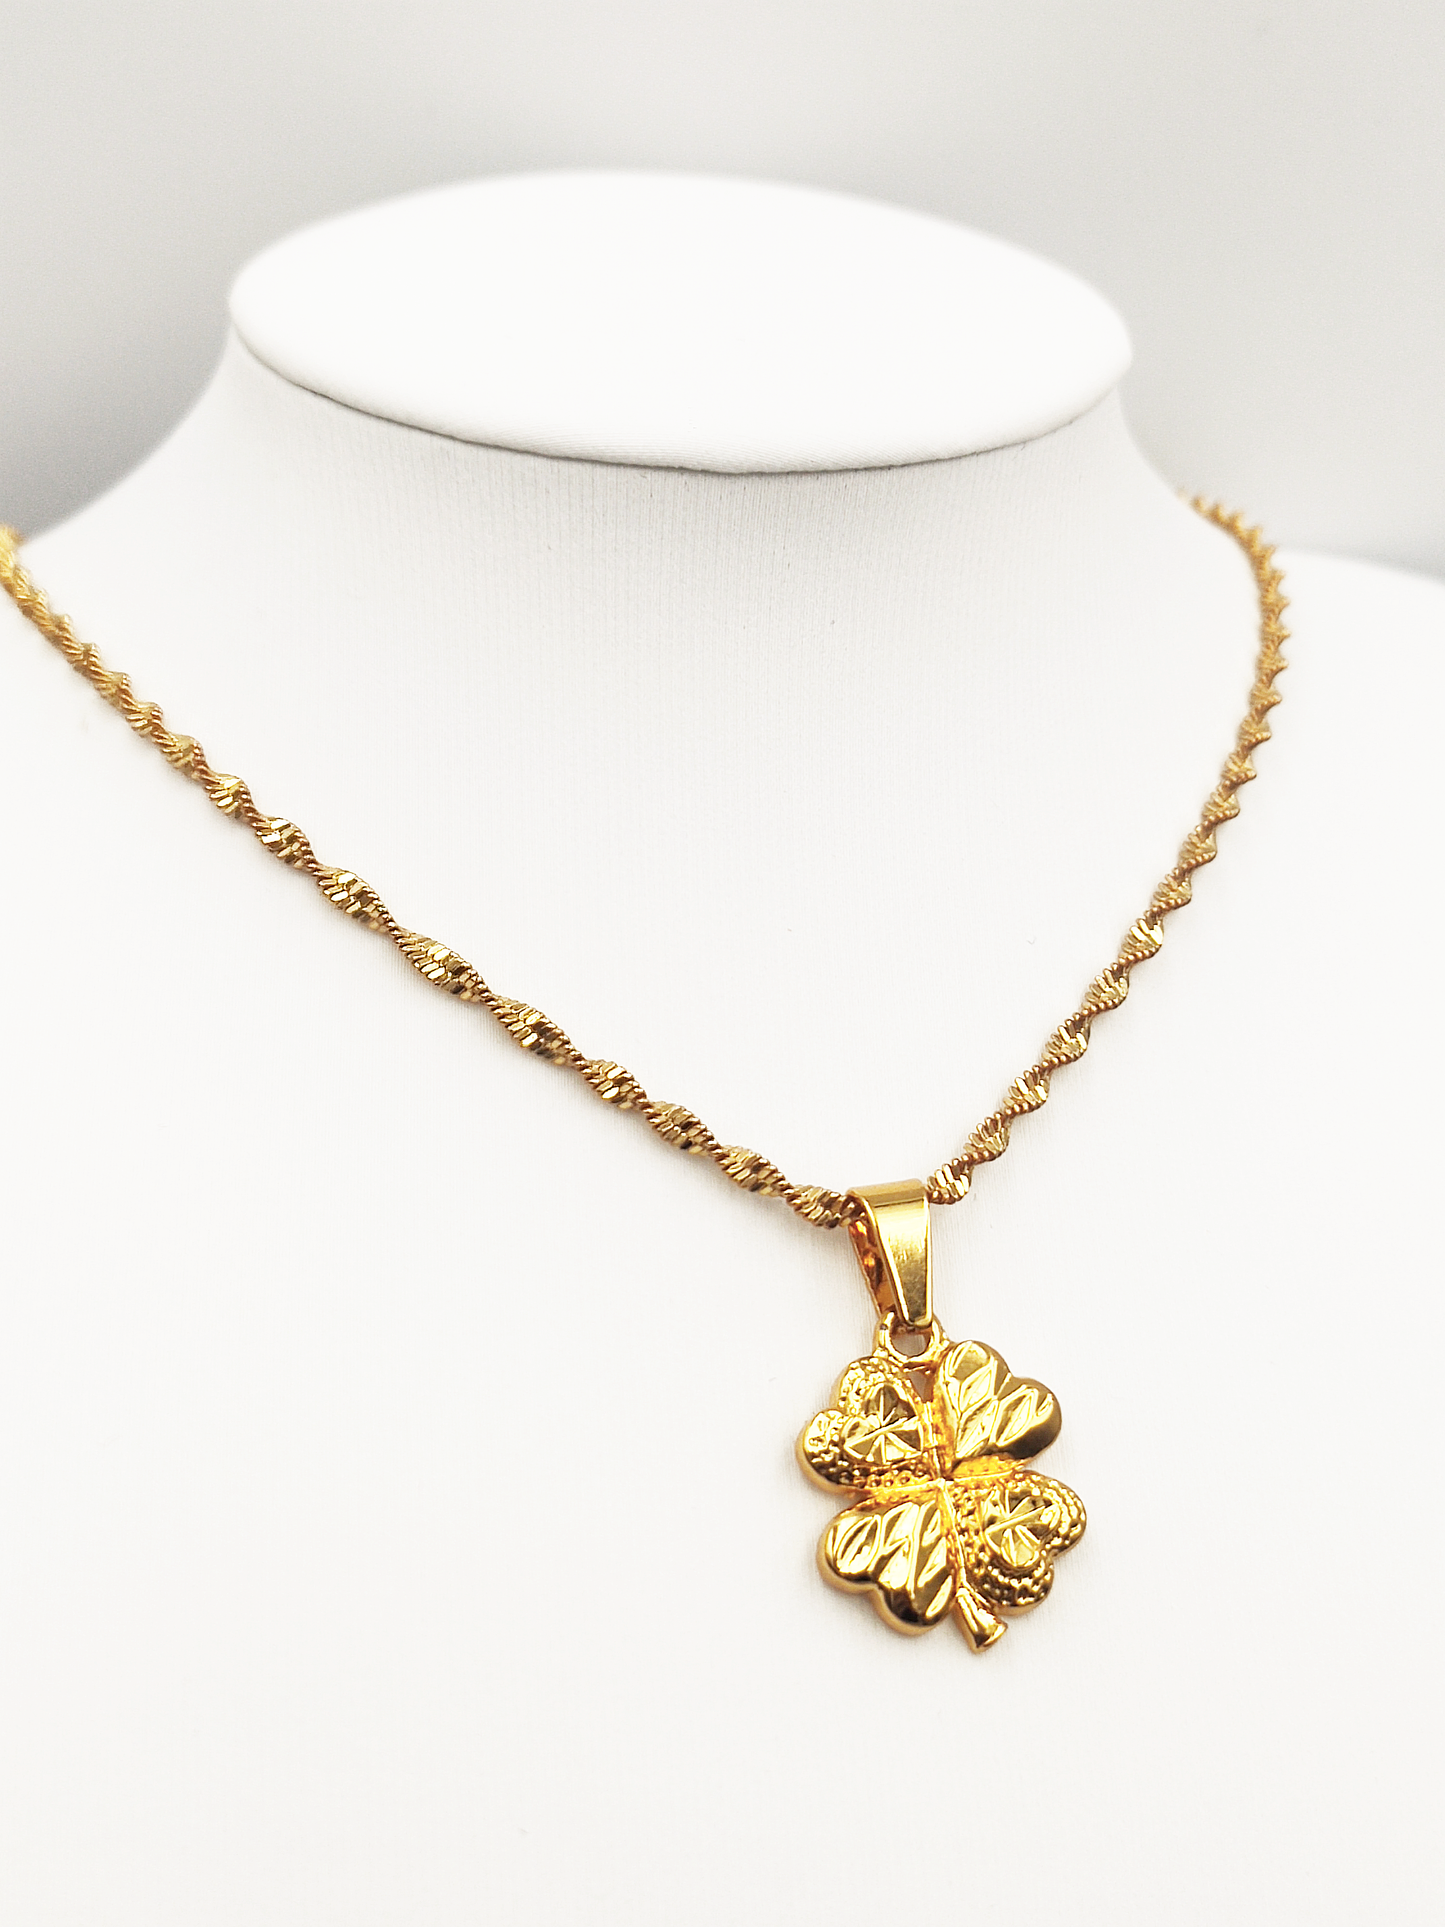 Titanium/Gold Plated Clover Pendent & Chain set ($66 take away)